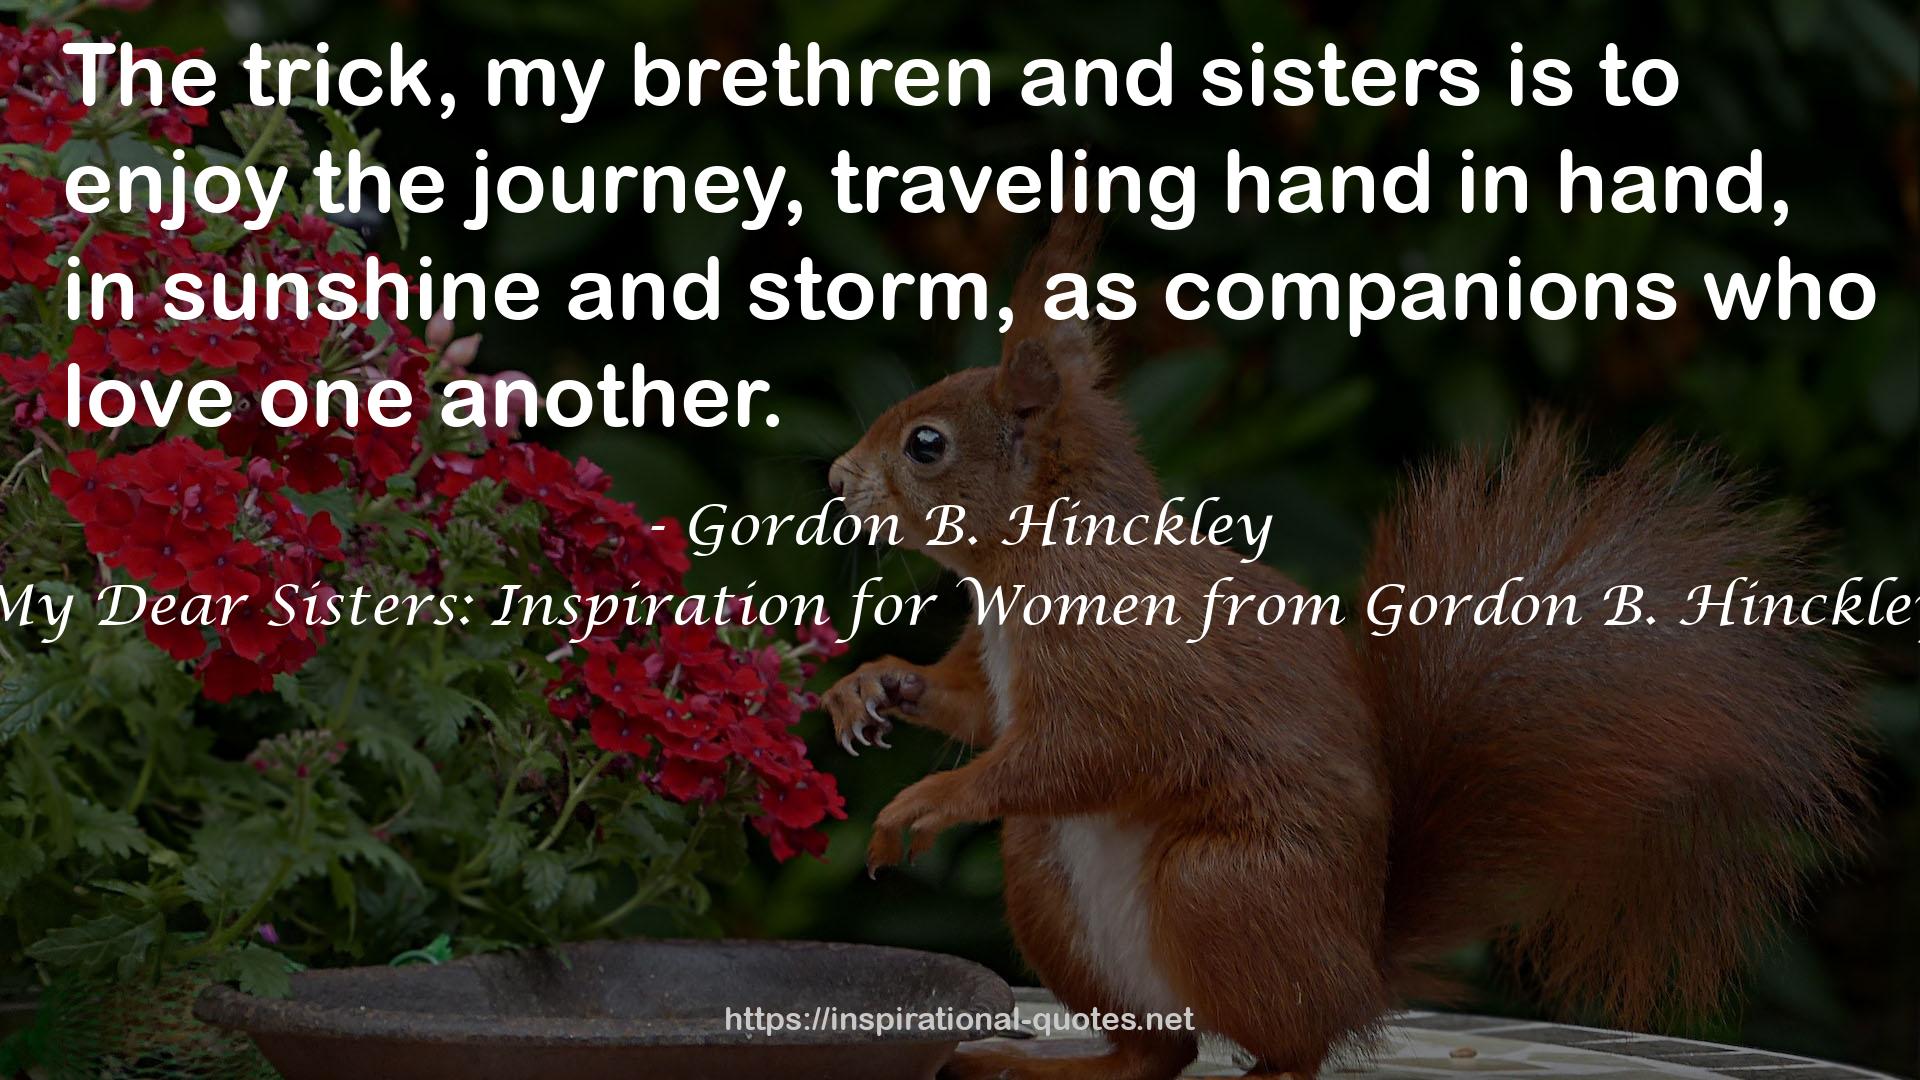 My Dear Sisters: Inspiration for Women from Gordon B. Hinckley QUOTES